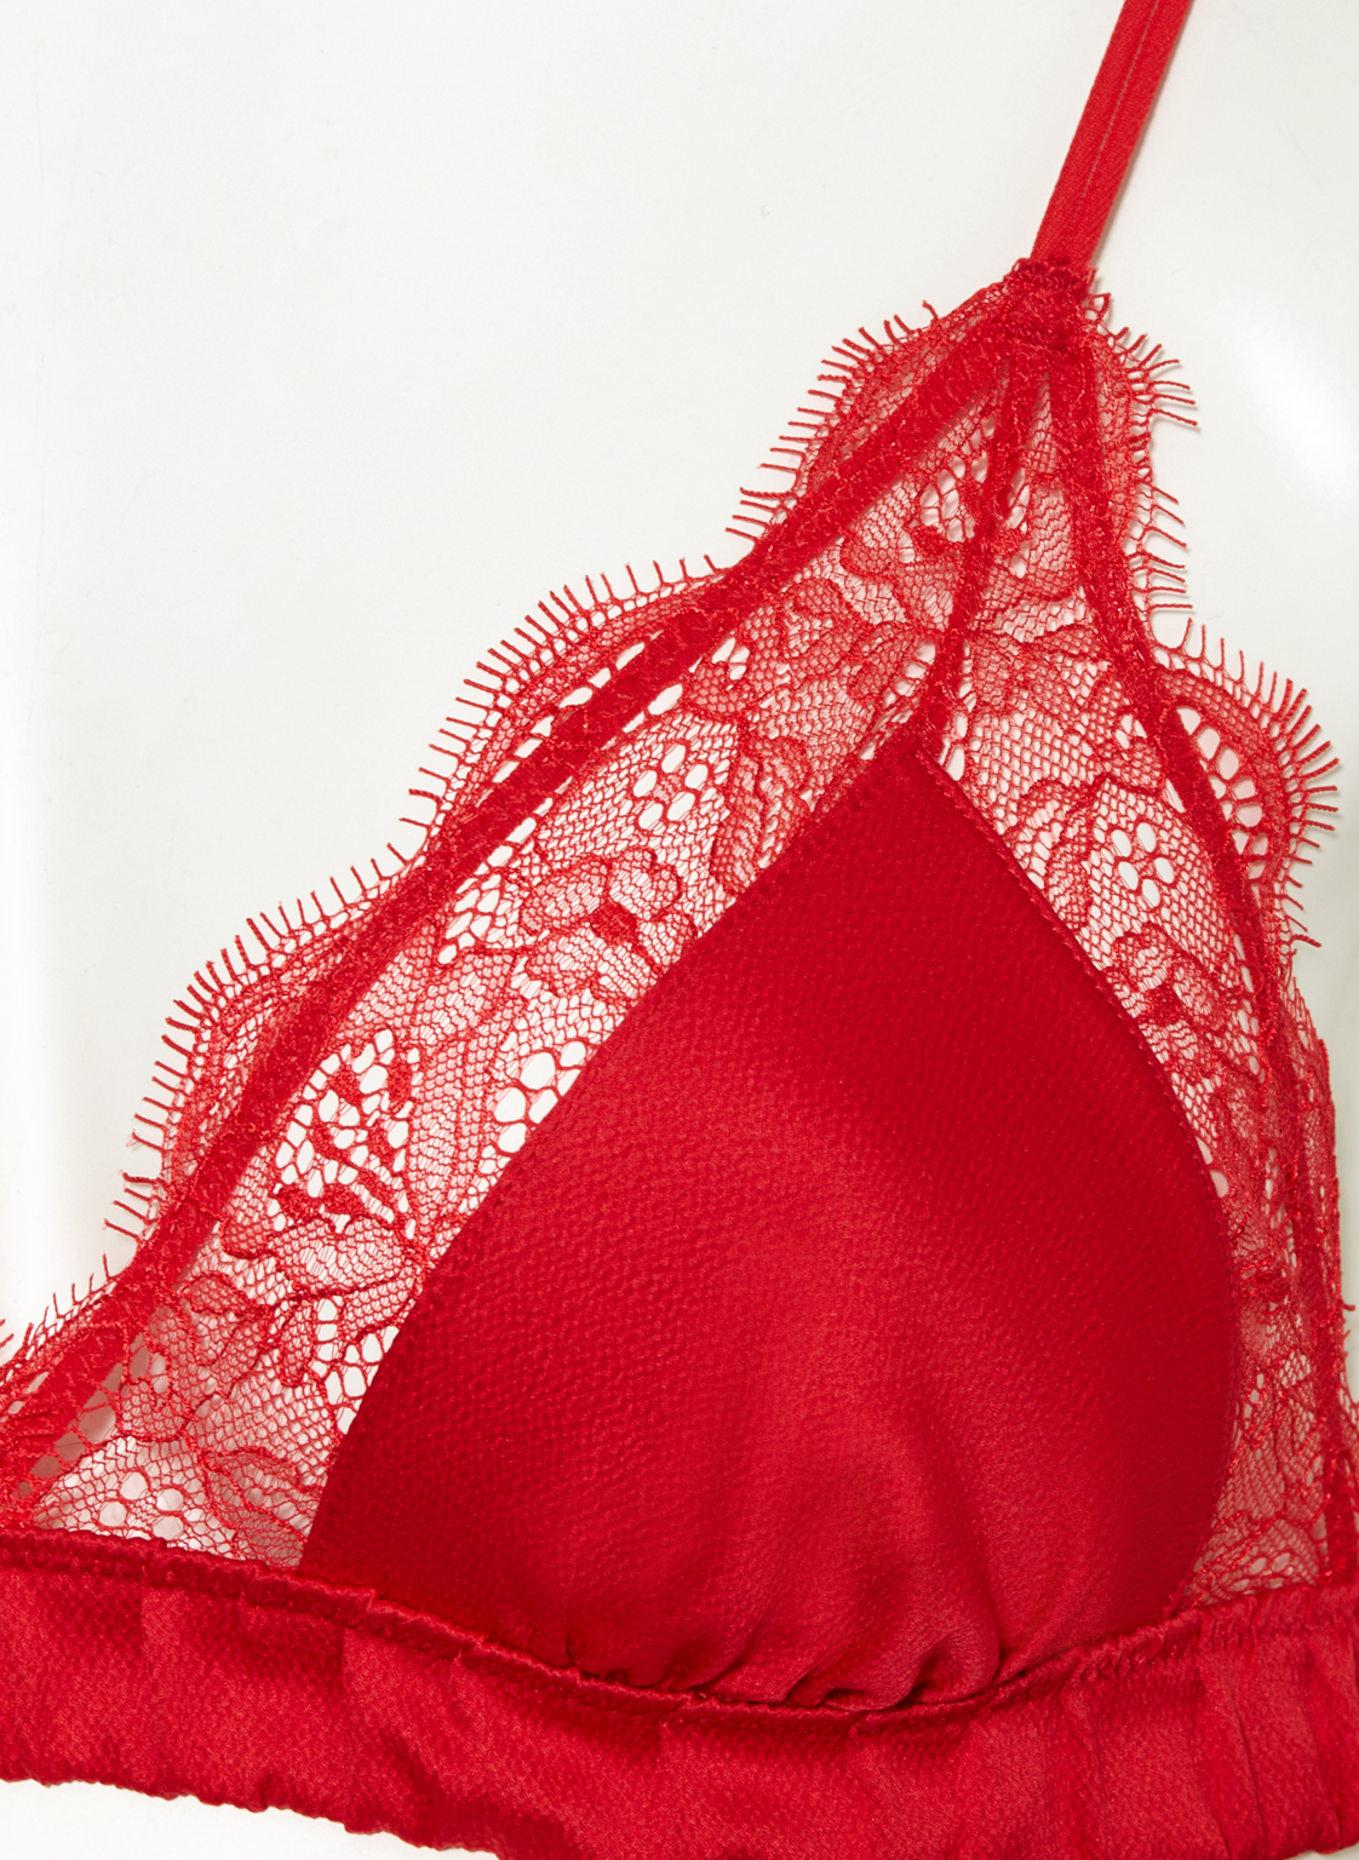 LOVE Stories Triangle bra LOVE LACE in satin in red